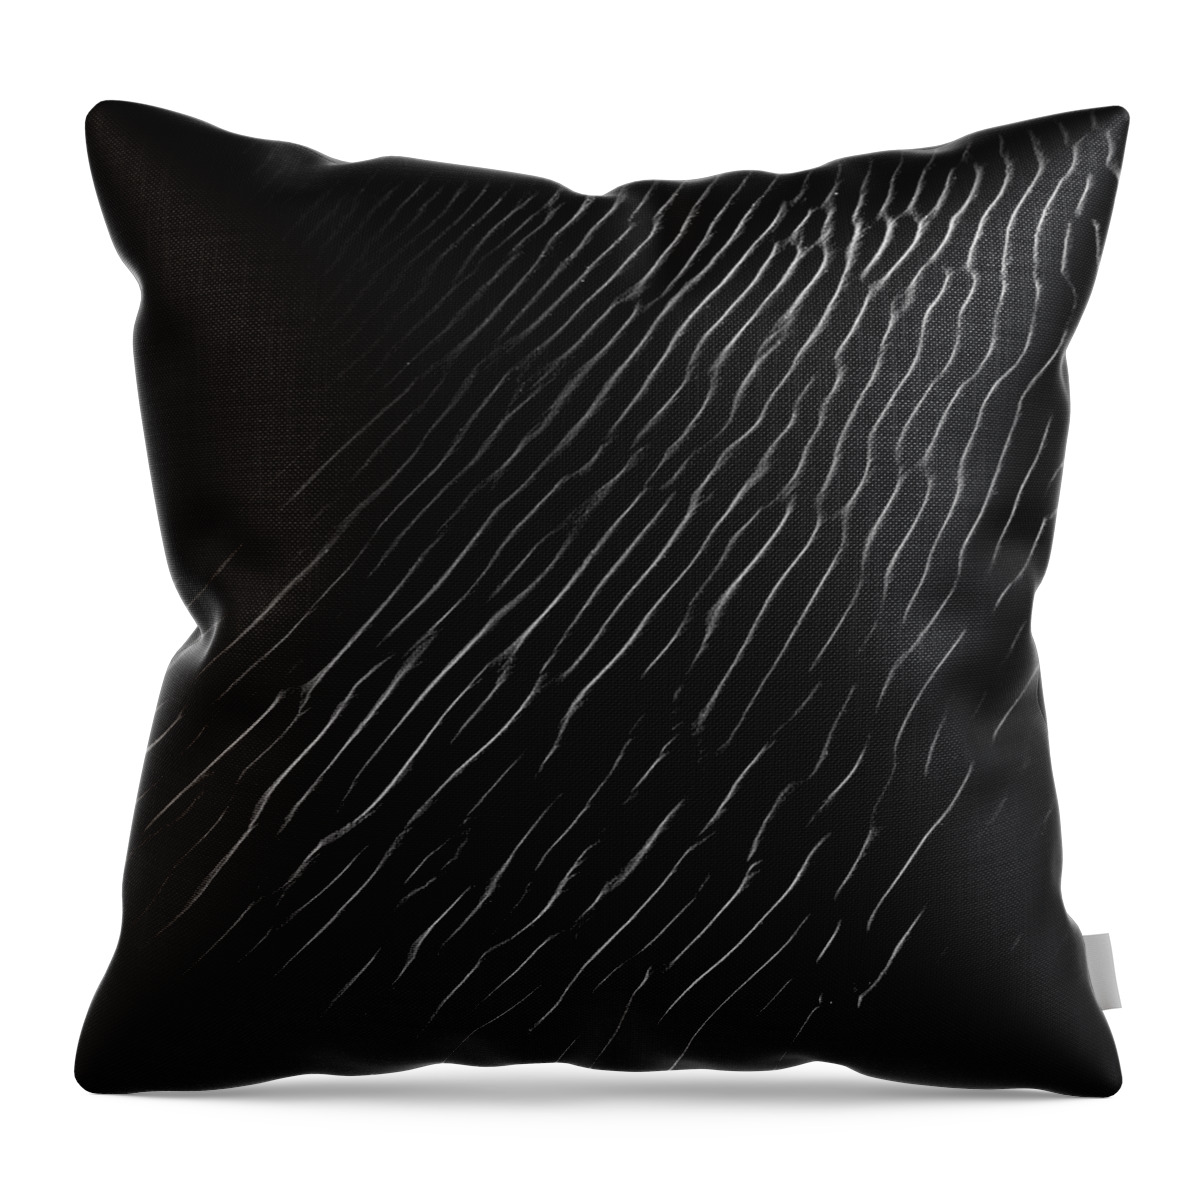 White Sands National Monument Throw Pillow featuring the photograph Sands Of Time by Doug Sturgess